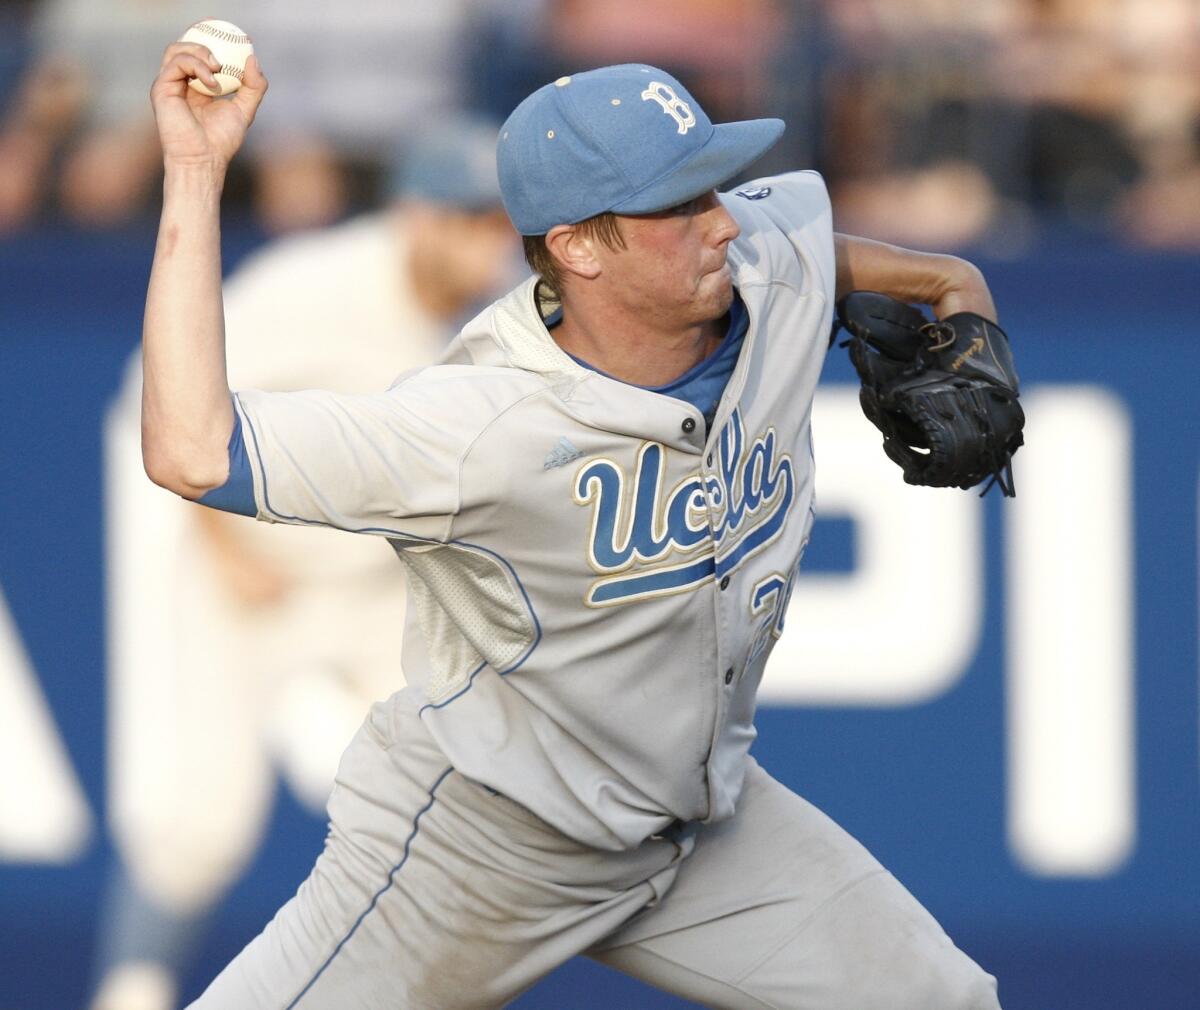 UCLA closer David Berg has played an instrumental role in helping the Bruins reach the College World Series.